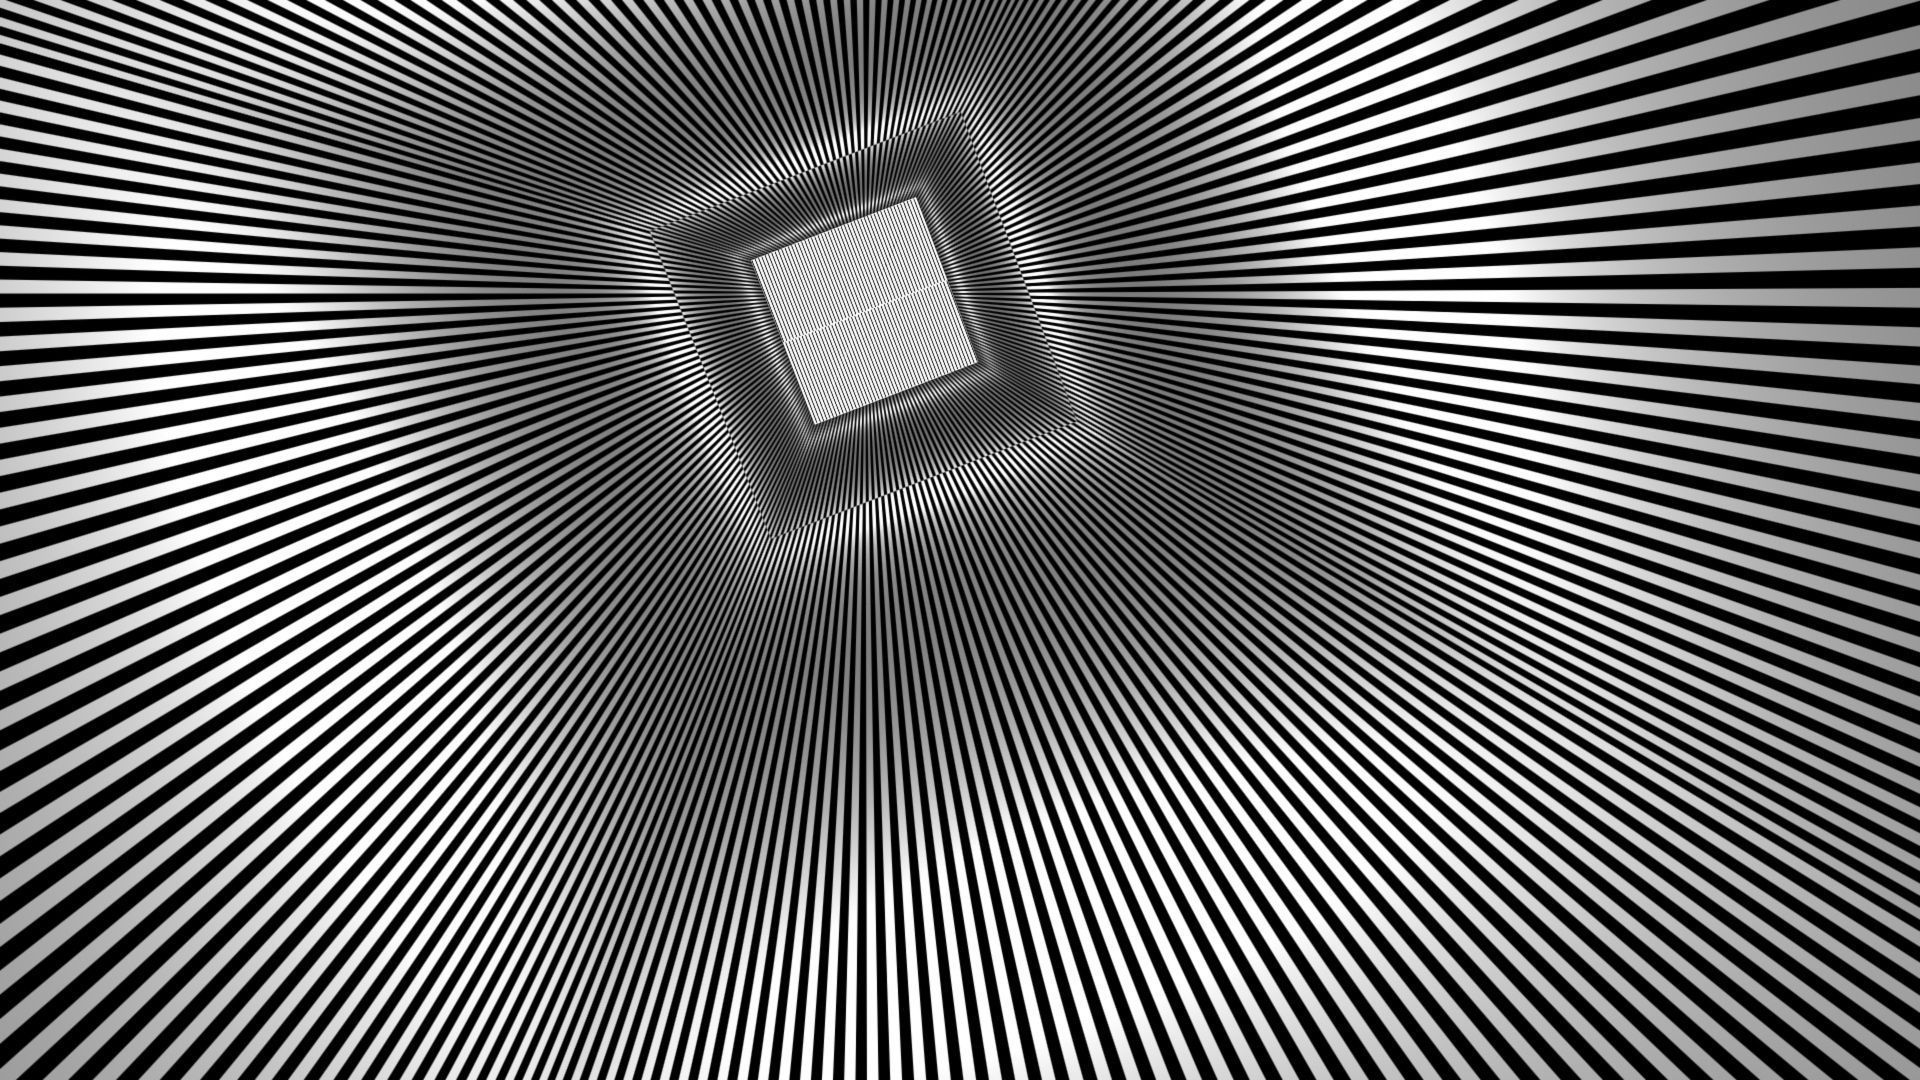 Square optical illusion wallpaper 44003 45097 hd wallpapers